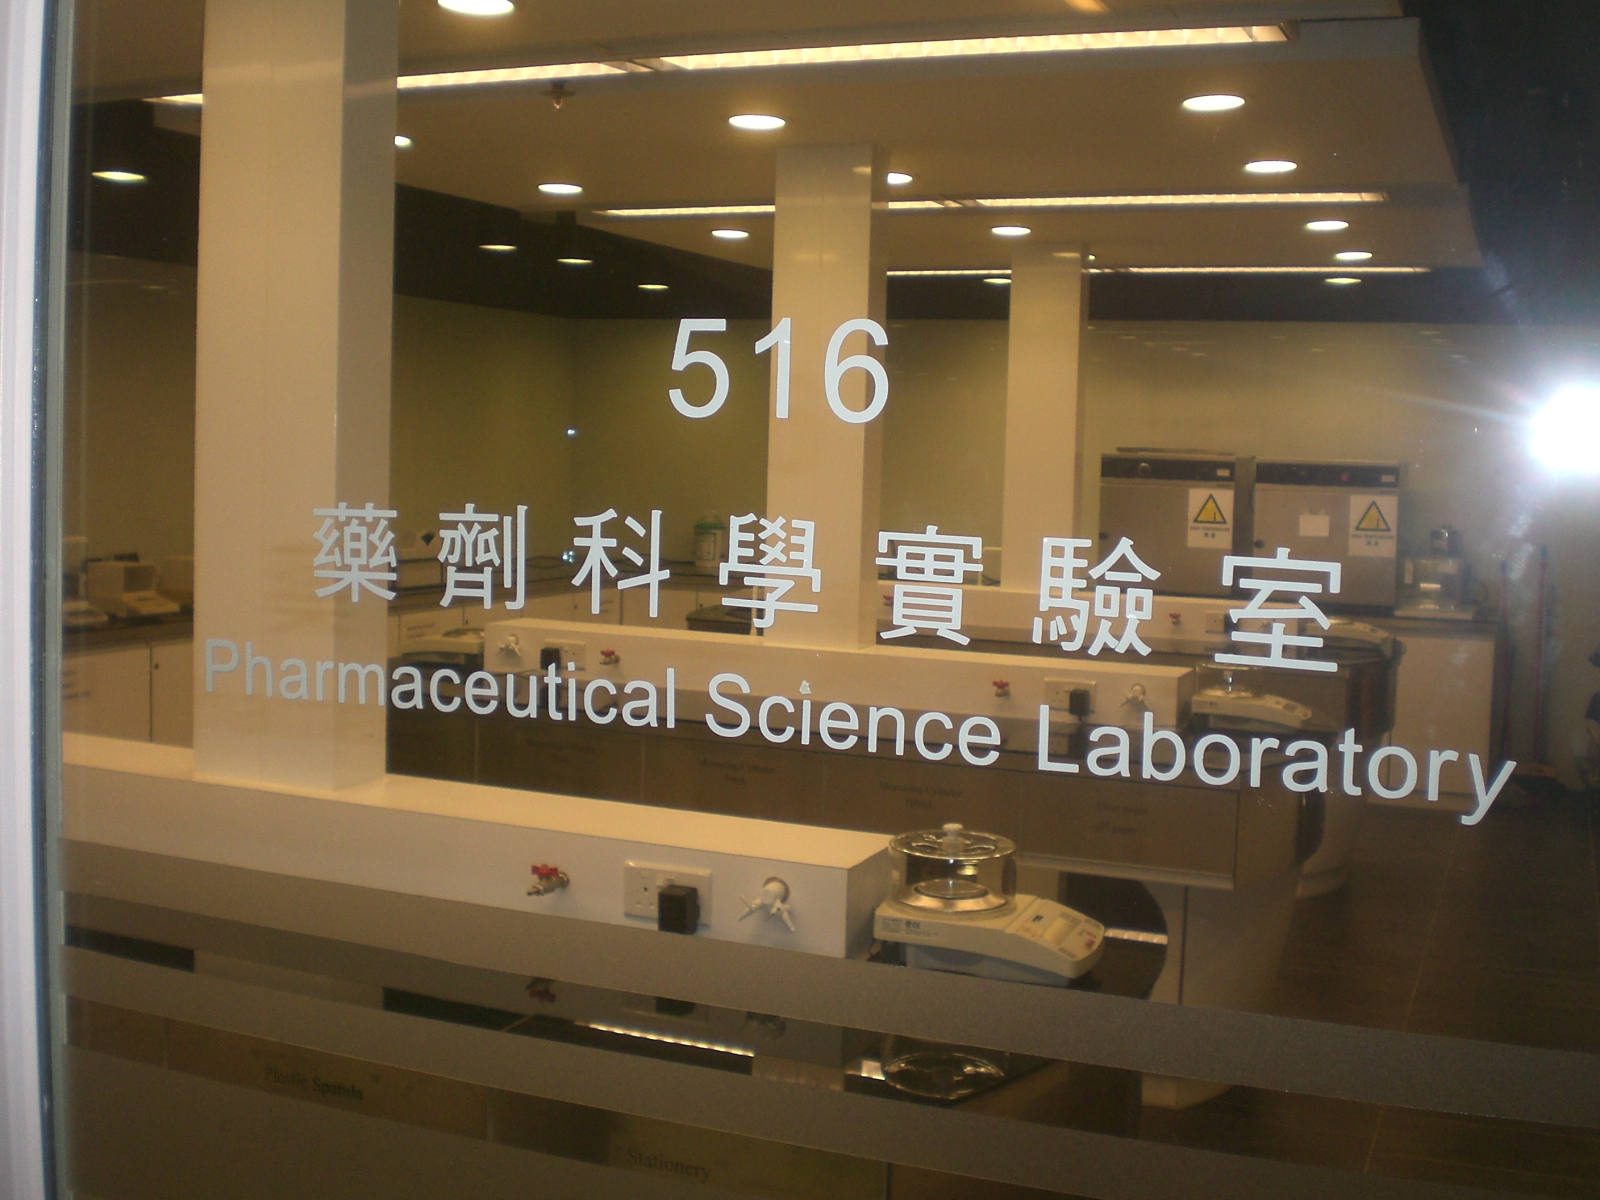 hk_chai_wan_ive_e897a5e58a91e7a791e5adb8e5afa6e9a997e5aea4_pharmaceutical_science_laboratory_rm_516